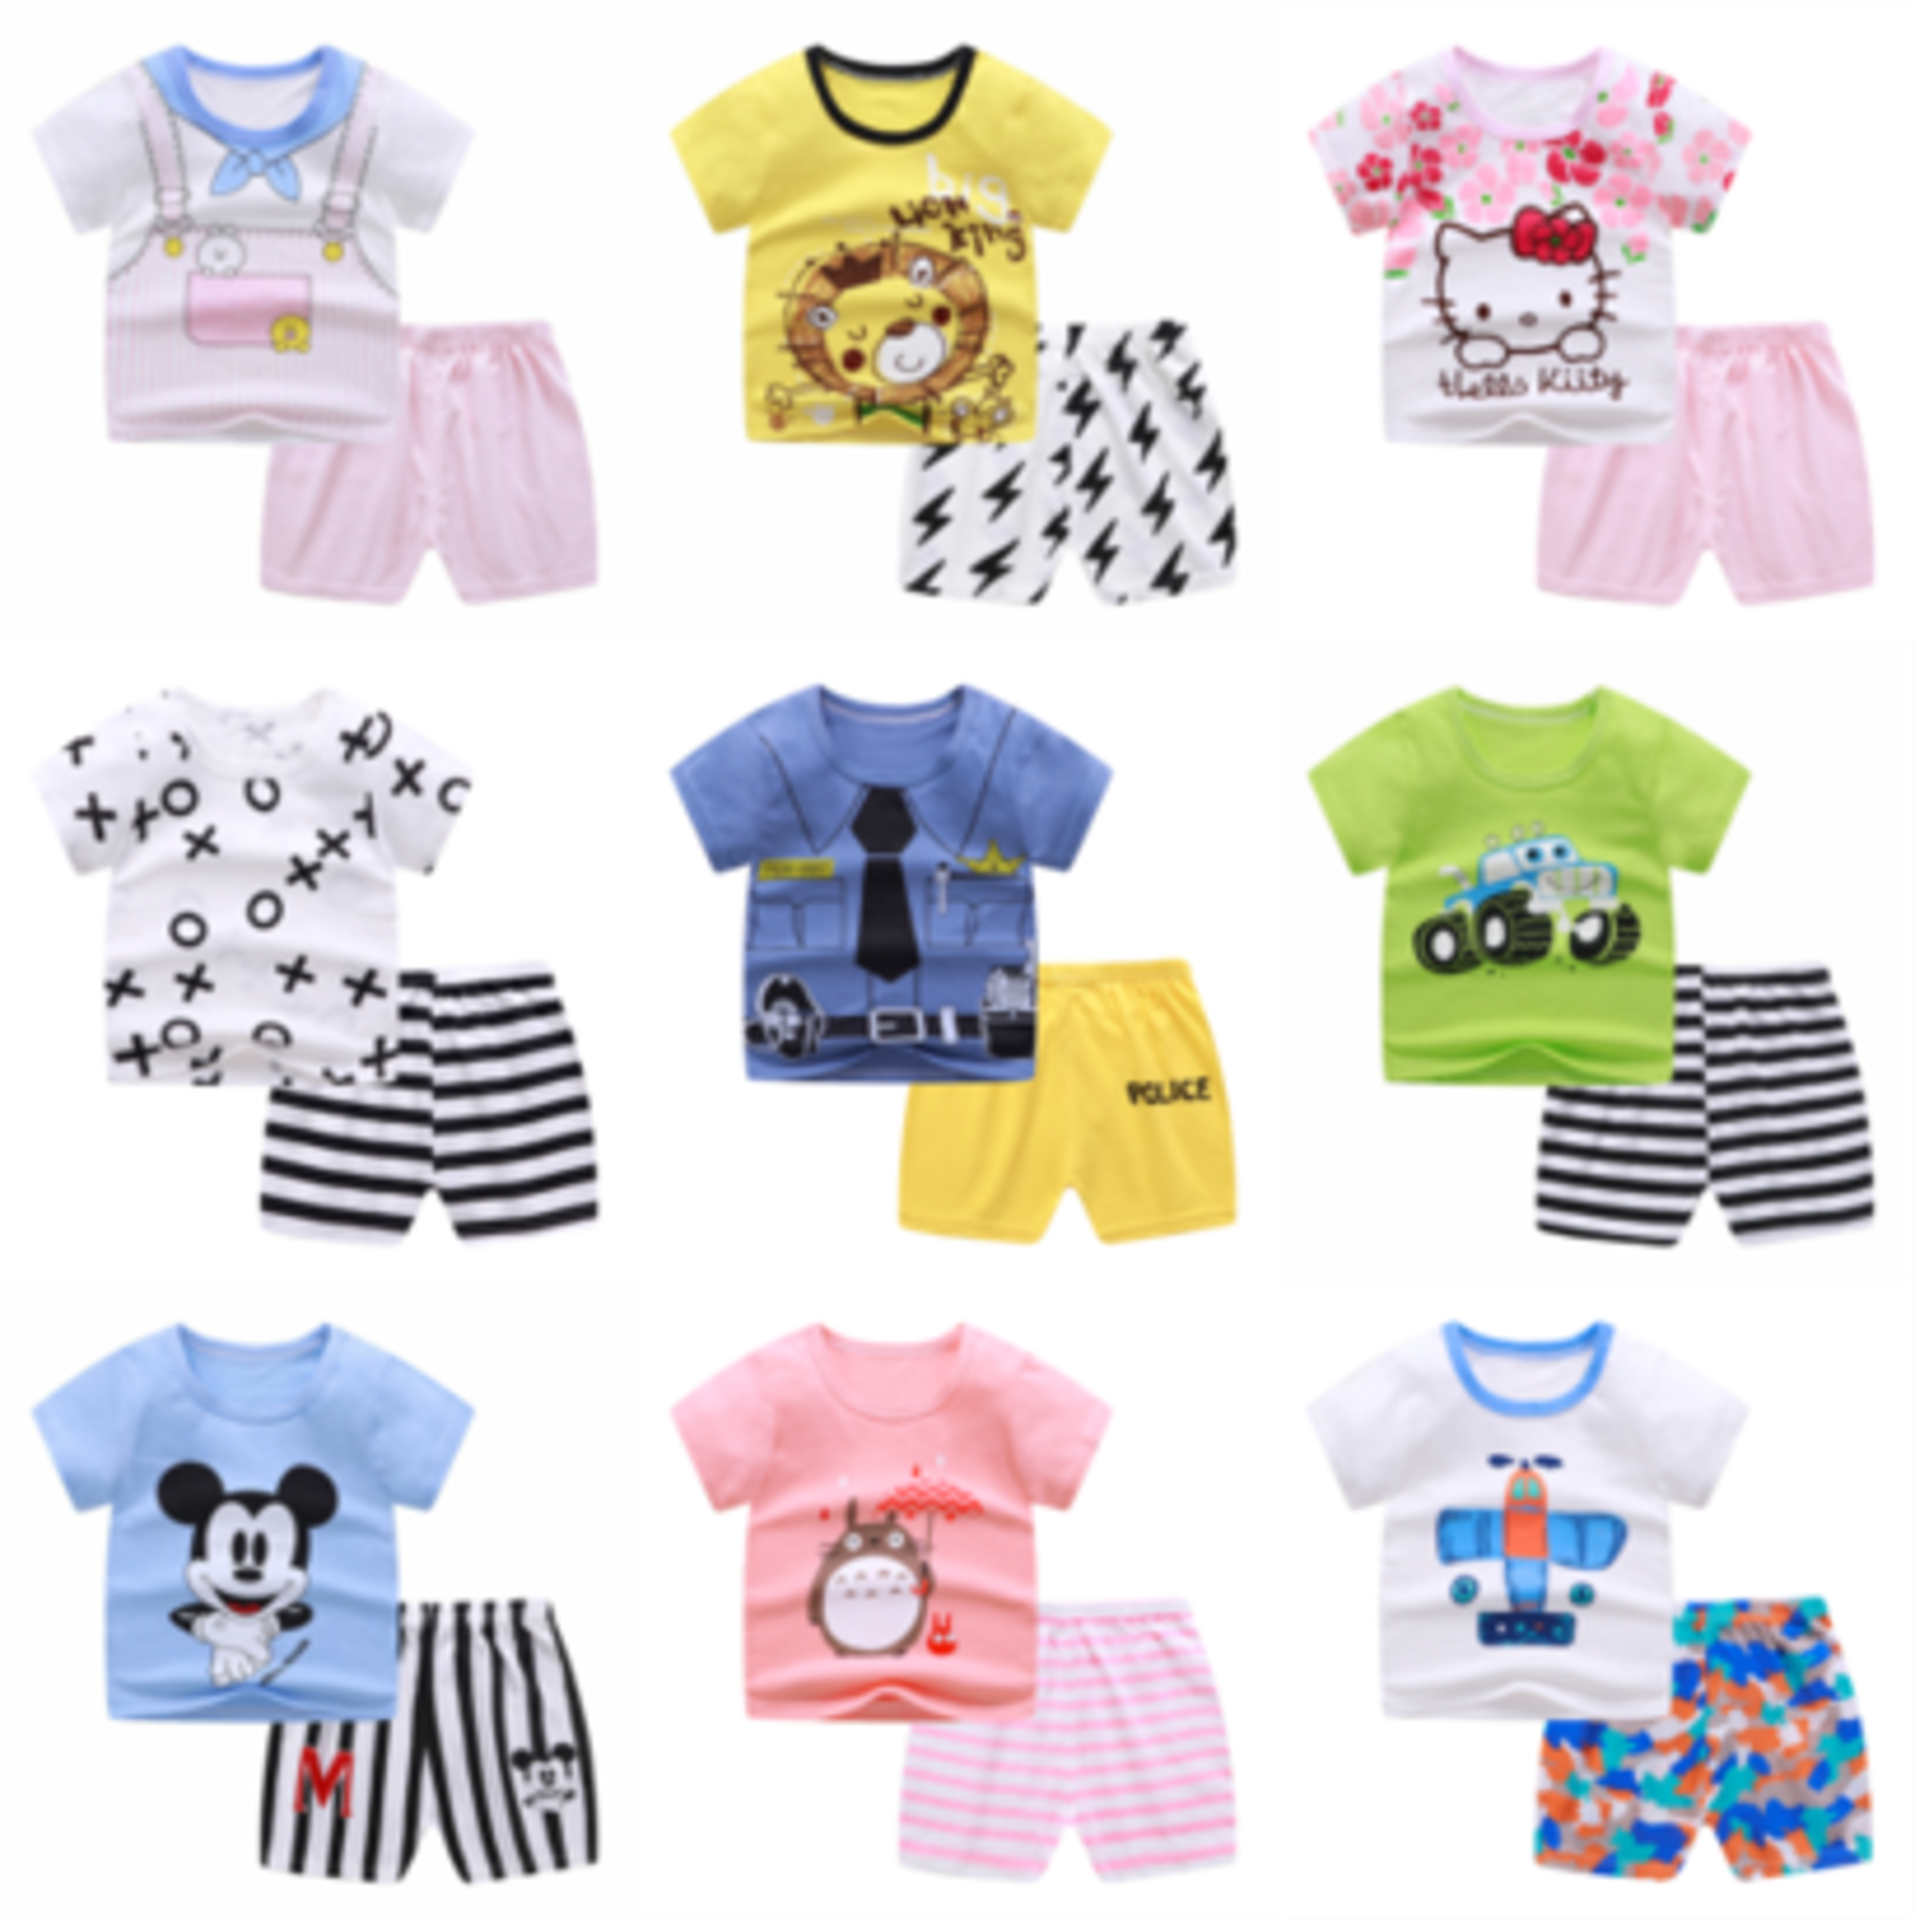 (NO VAT) 10 X BRAND NEW BABIES PJ SET WHALE DESIGN VARIOUS SIZES FROM 6 MONTHS TO 4 YEARS - S1